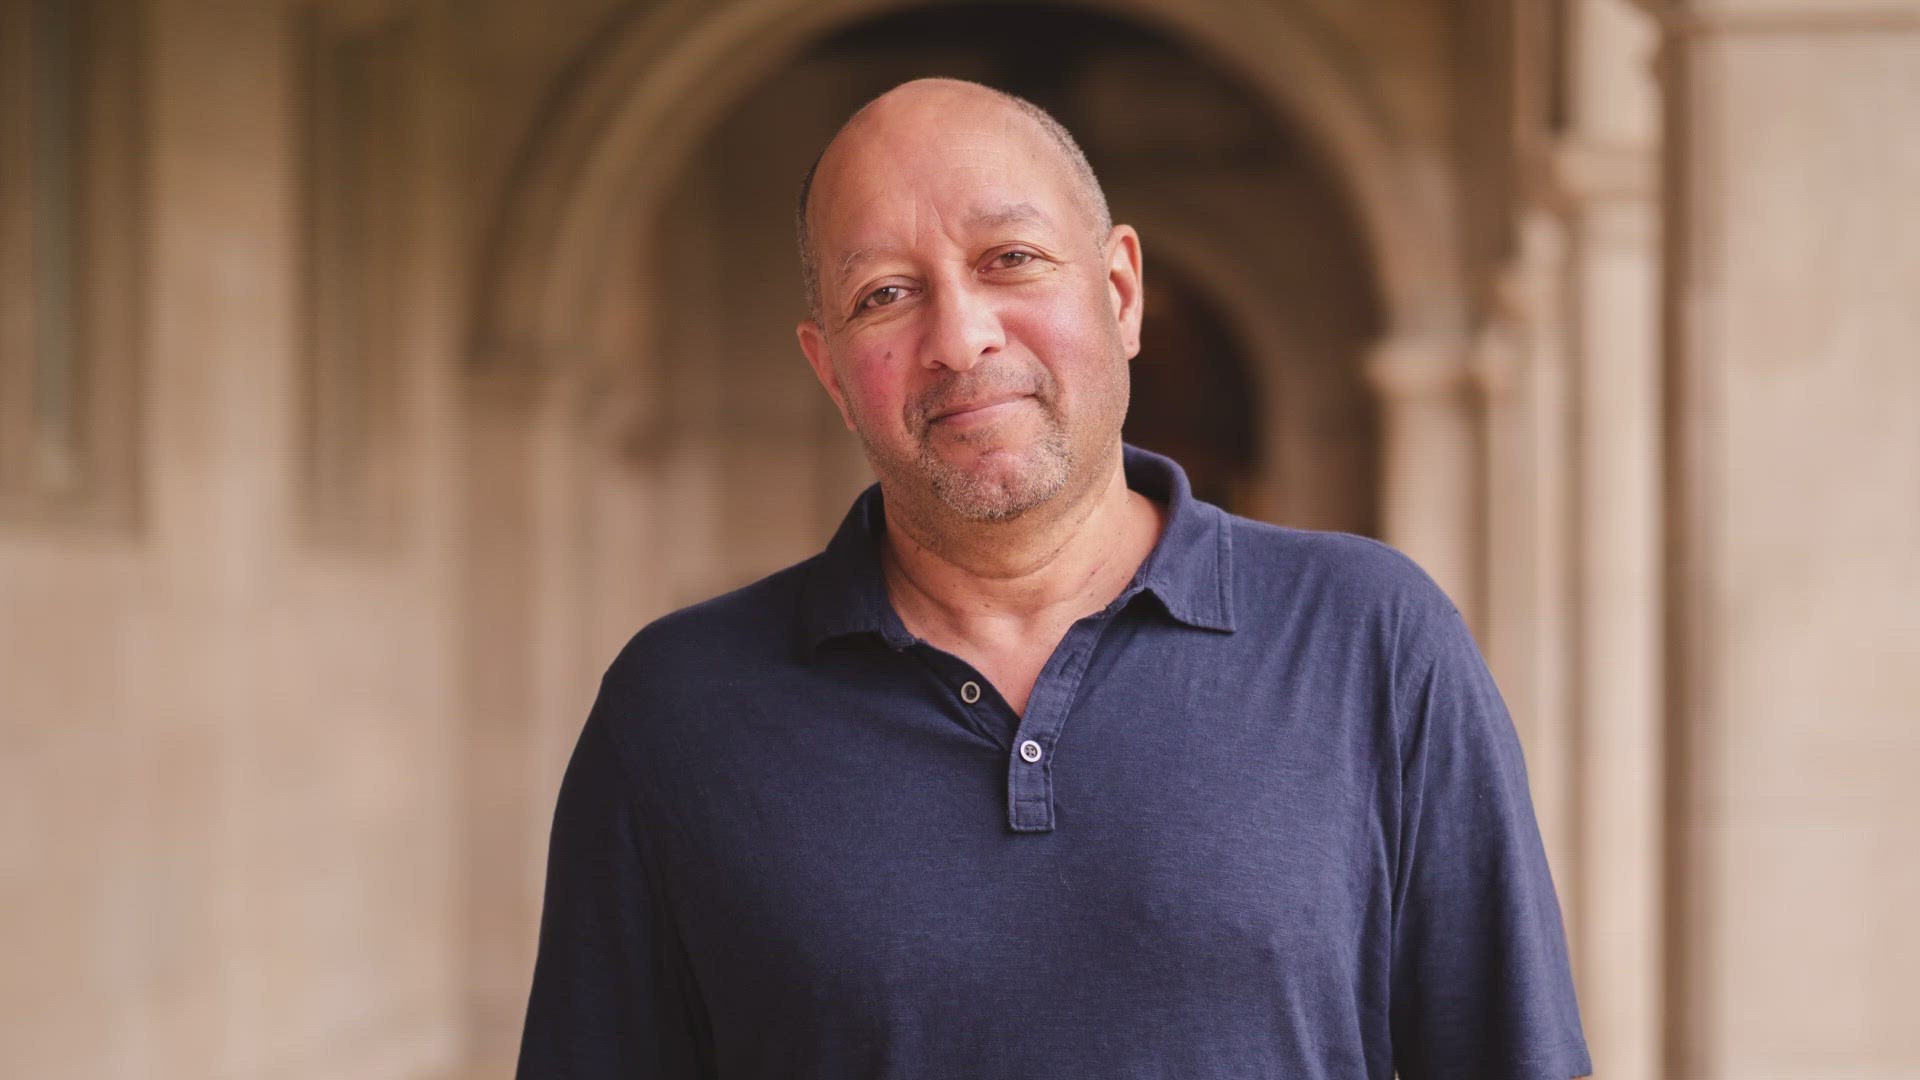 Carl Phillips, a Washington University professor, was awarded the prize for "Then the War: And Selected Poems, 2007-2020."  He is the 5th faculty member to win.